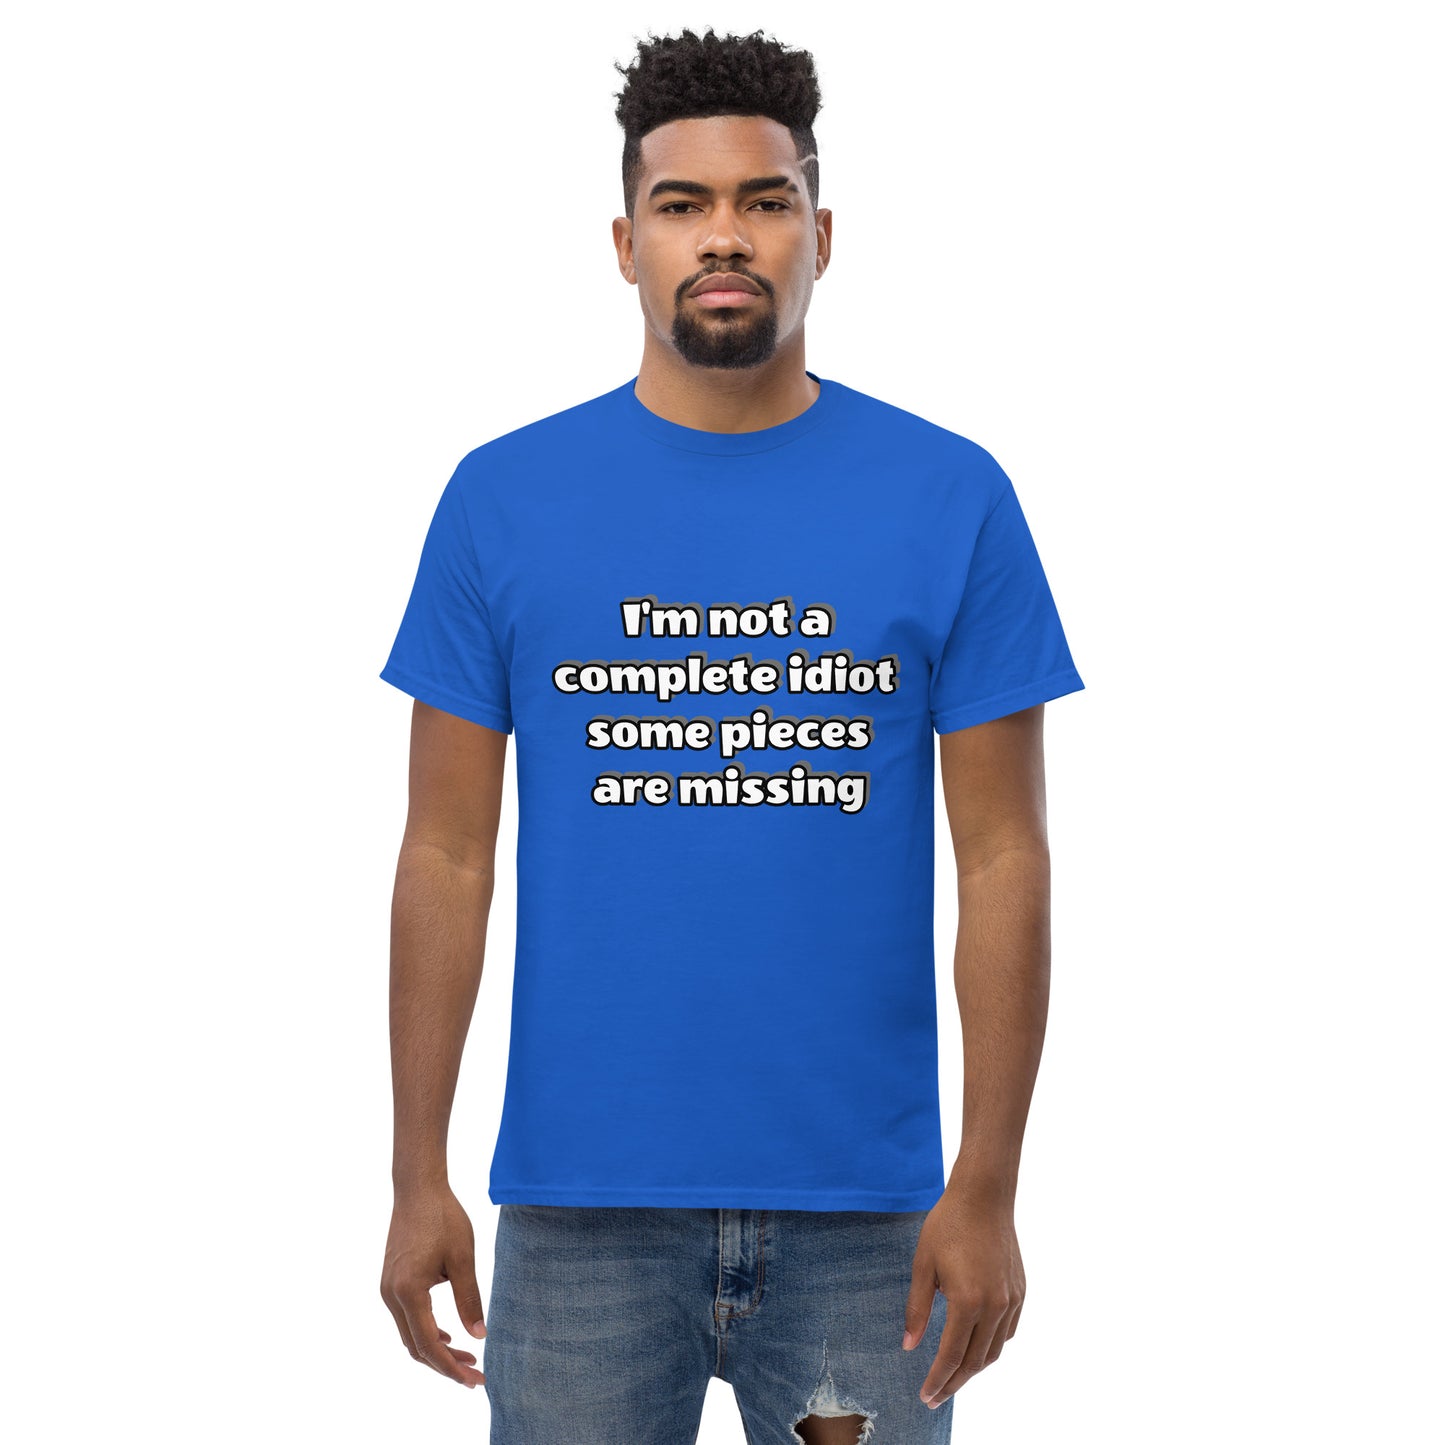 Men with royal blue t-shirt with text “I’m not a complete idiot, some pieces are missing”